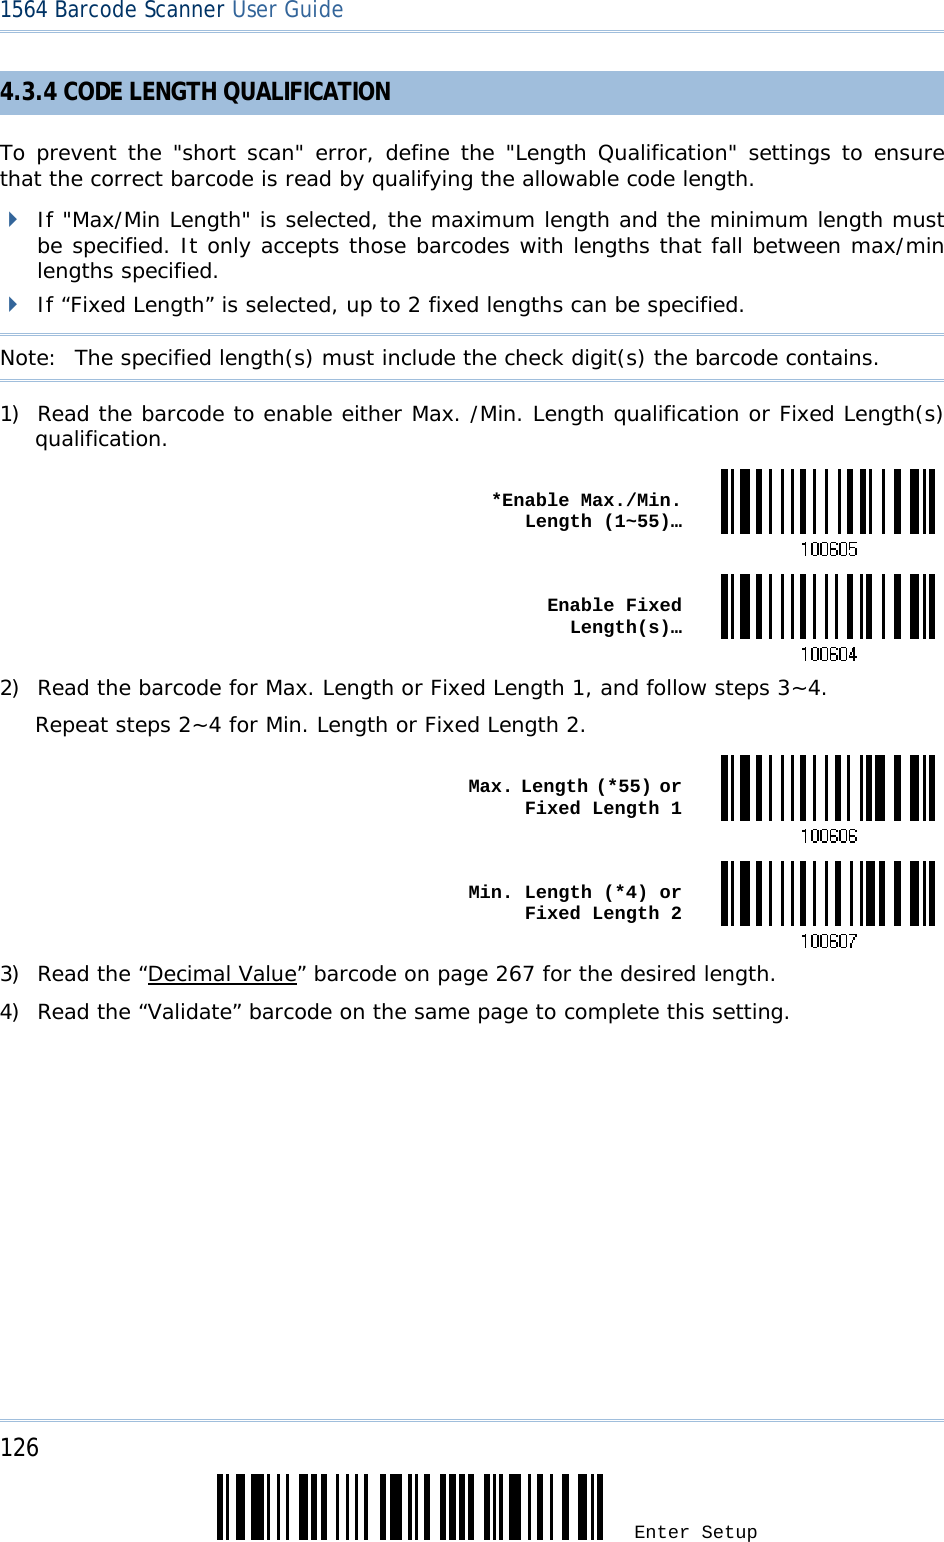 126 Enter Setup 1564 Barcode Scanner User Guide  4.3.4 CODE LENGTH QUALIFICATION To prevent the &quot;short scan&quot; error, define the &quot;Length Qualification&quot; settings to ensure that the correct barcode is read by qualifying the allowable code length.  If &quot;Max/Min Length&quot; is selected, the maximum length and the minimum length must be specified. It only accepts those barcodes with lengths that fall between max/min lengths specified.  If “Fixed Length” is selected, up to 2 fixed lengths can be specified. Note:   The specified length(s) must include the check digit(s) the barcode contains. 1) Read the barcode to enable either Max. /Min. Length qualification or Fixed Length(s) qualification.  *Enable Max./Min. Length (1~55)… Enable Fixed Length(s)…2) Read the barcode for Max. Length or Fixed Length 1, and follow steps 3~4. Repeat steps 2~4 for Min. Length or Fixed Length 2.  Max. Length (*55) or Fixed Length 1 Min. Length (*4) or Fixed Length 23) Read the “Decimal Value” barcode on page 267 for the desired length.  4) Read the “Validate” barcode on the same page to complete this setting.      